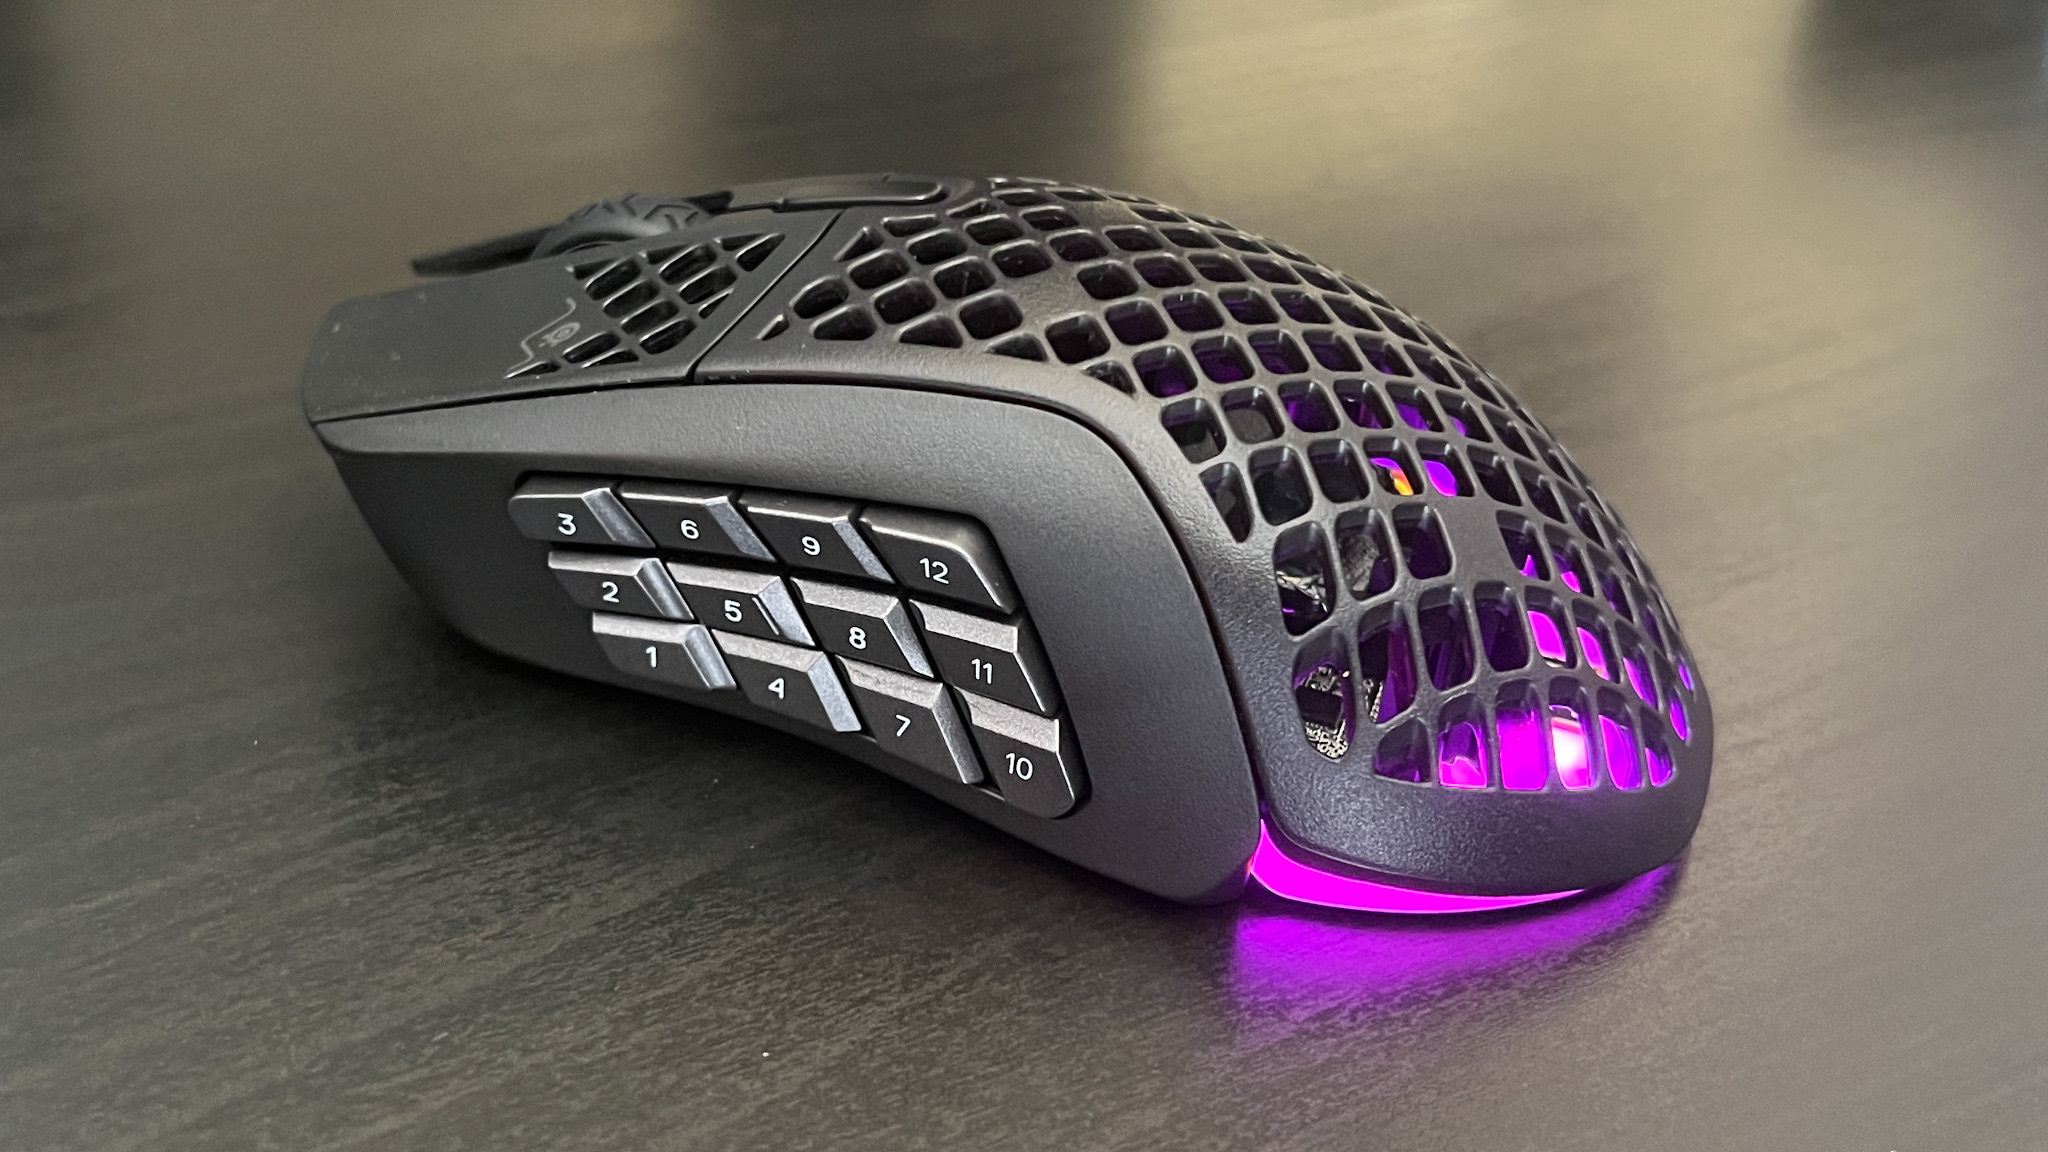 SteelSeries Aerox 9 review: "The lightest MMO / MOBA mouse we've